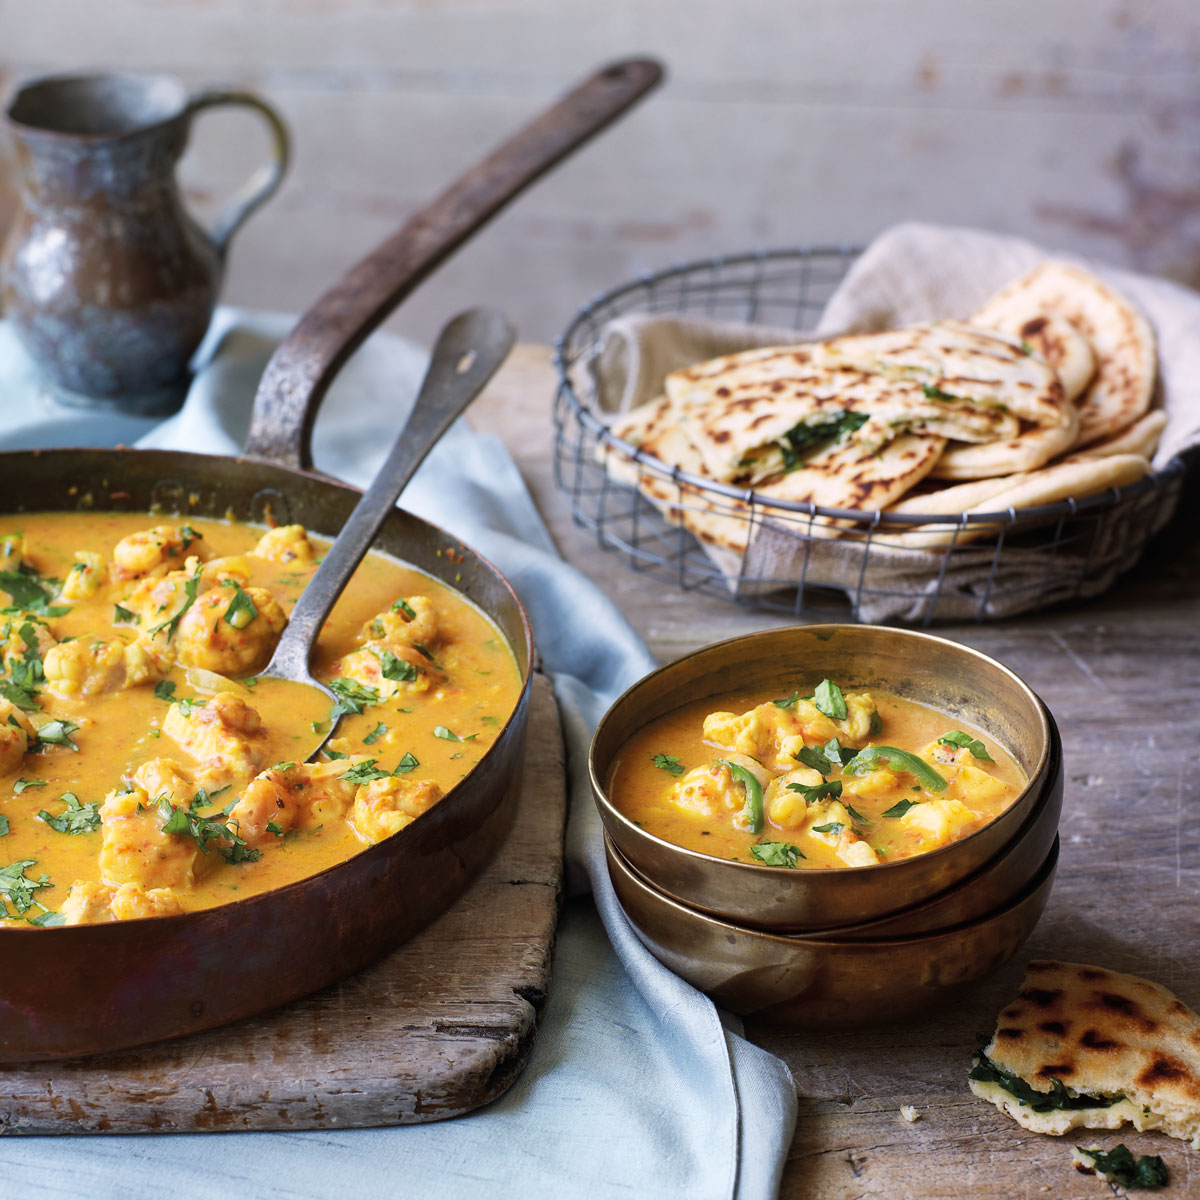 goan-fish-curry-in-pan-goan-fish-curry-with-garlic-and-coriander-naans-curry-recipe-goodhousekeeping-co-uk